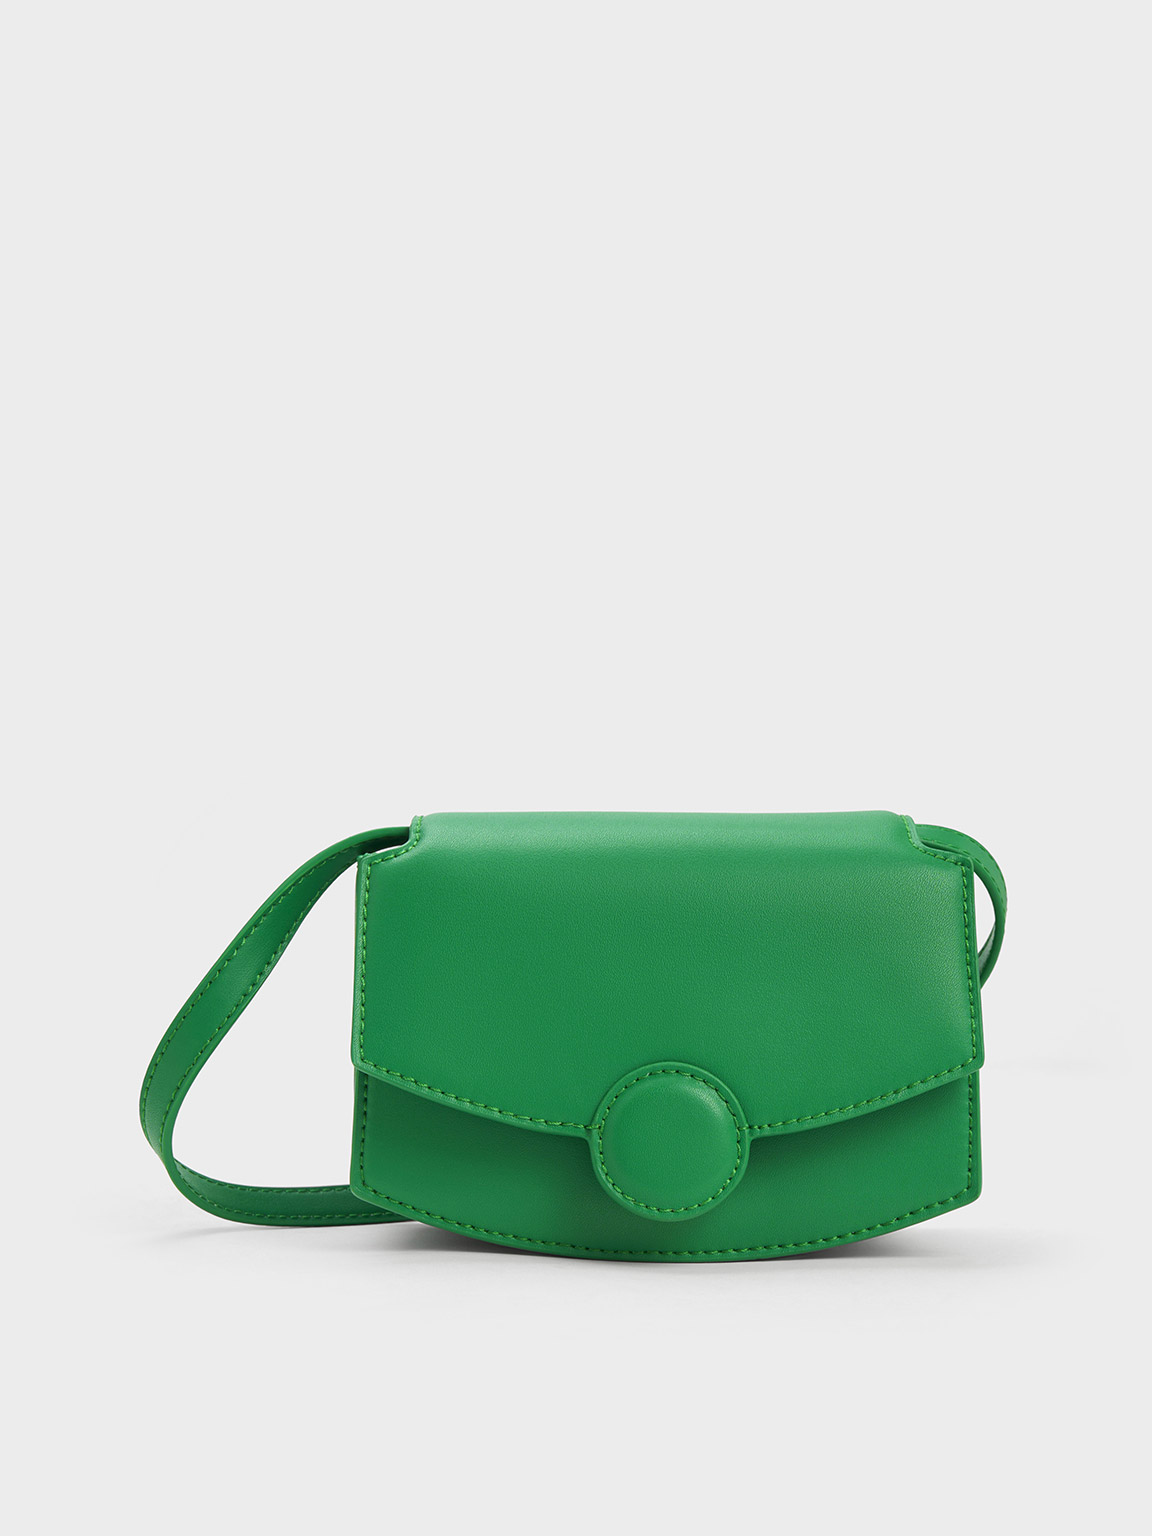 Charles & Keith - Women's Clover Curved Shoulder Bag, Green, S